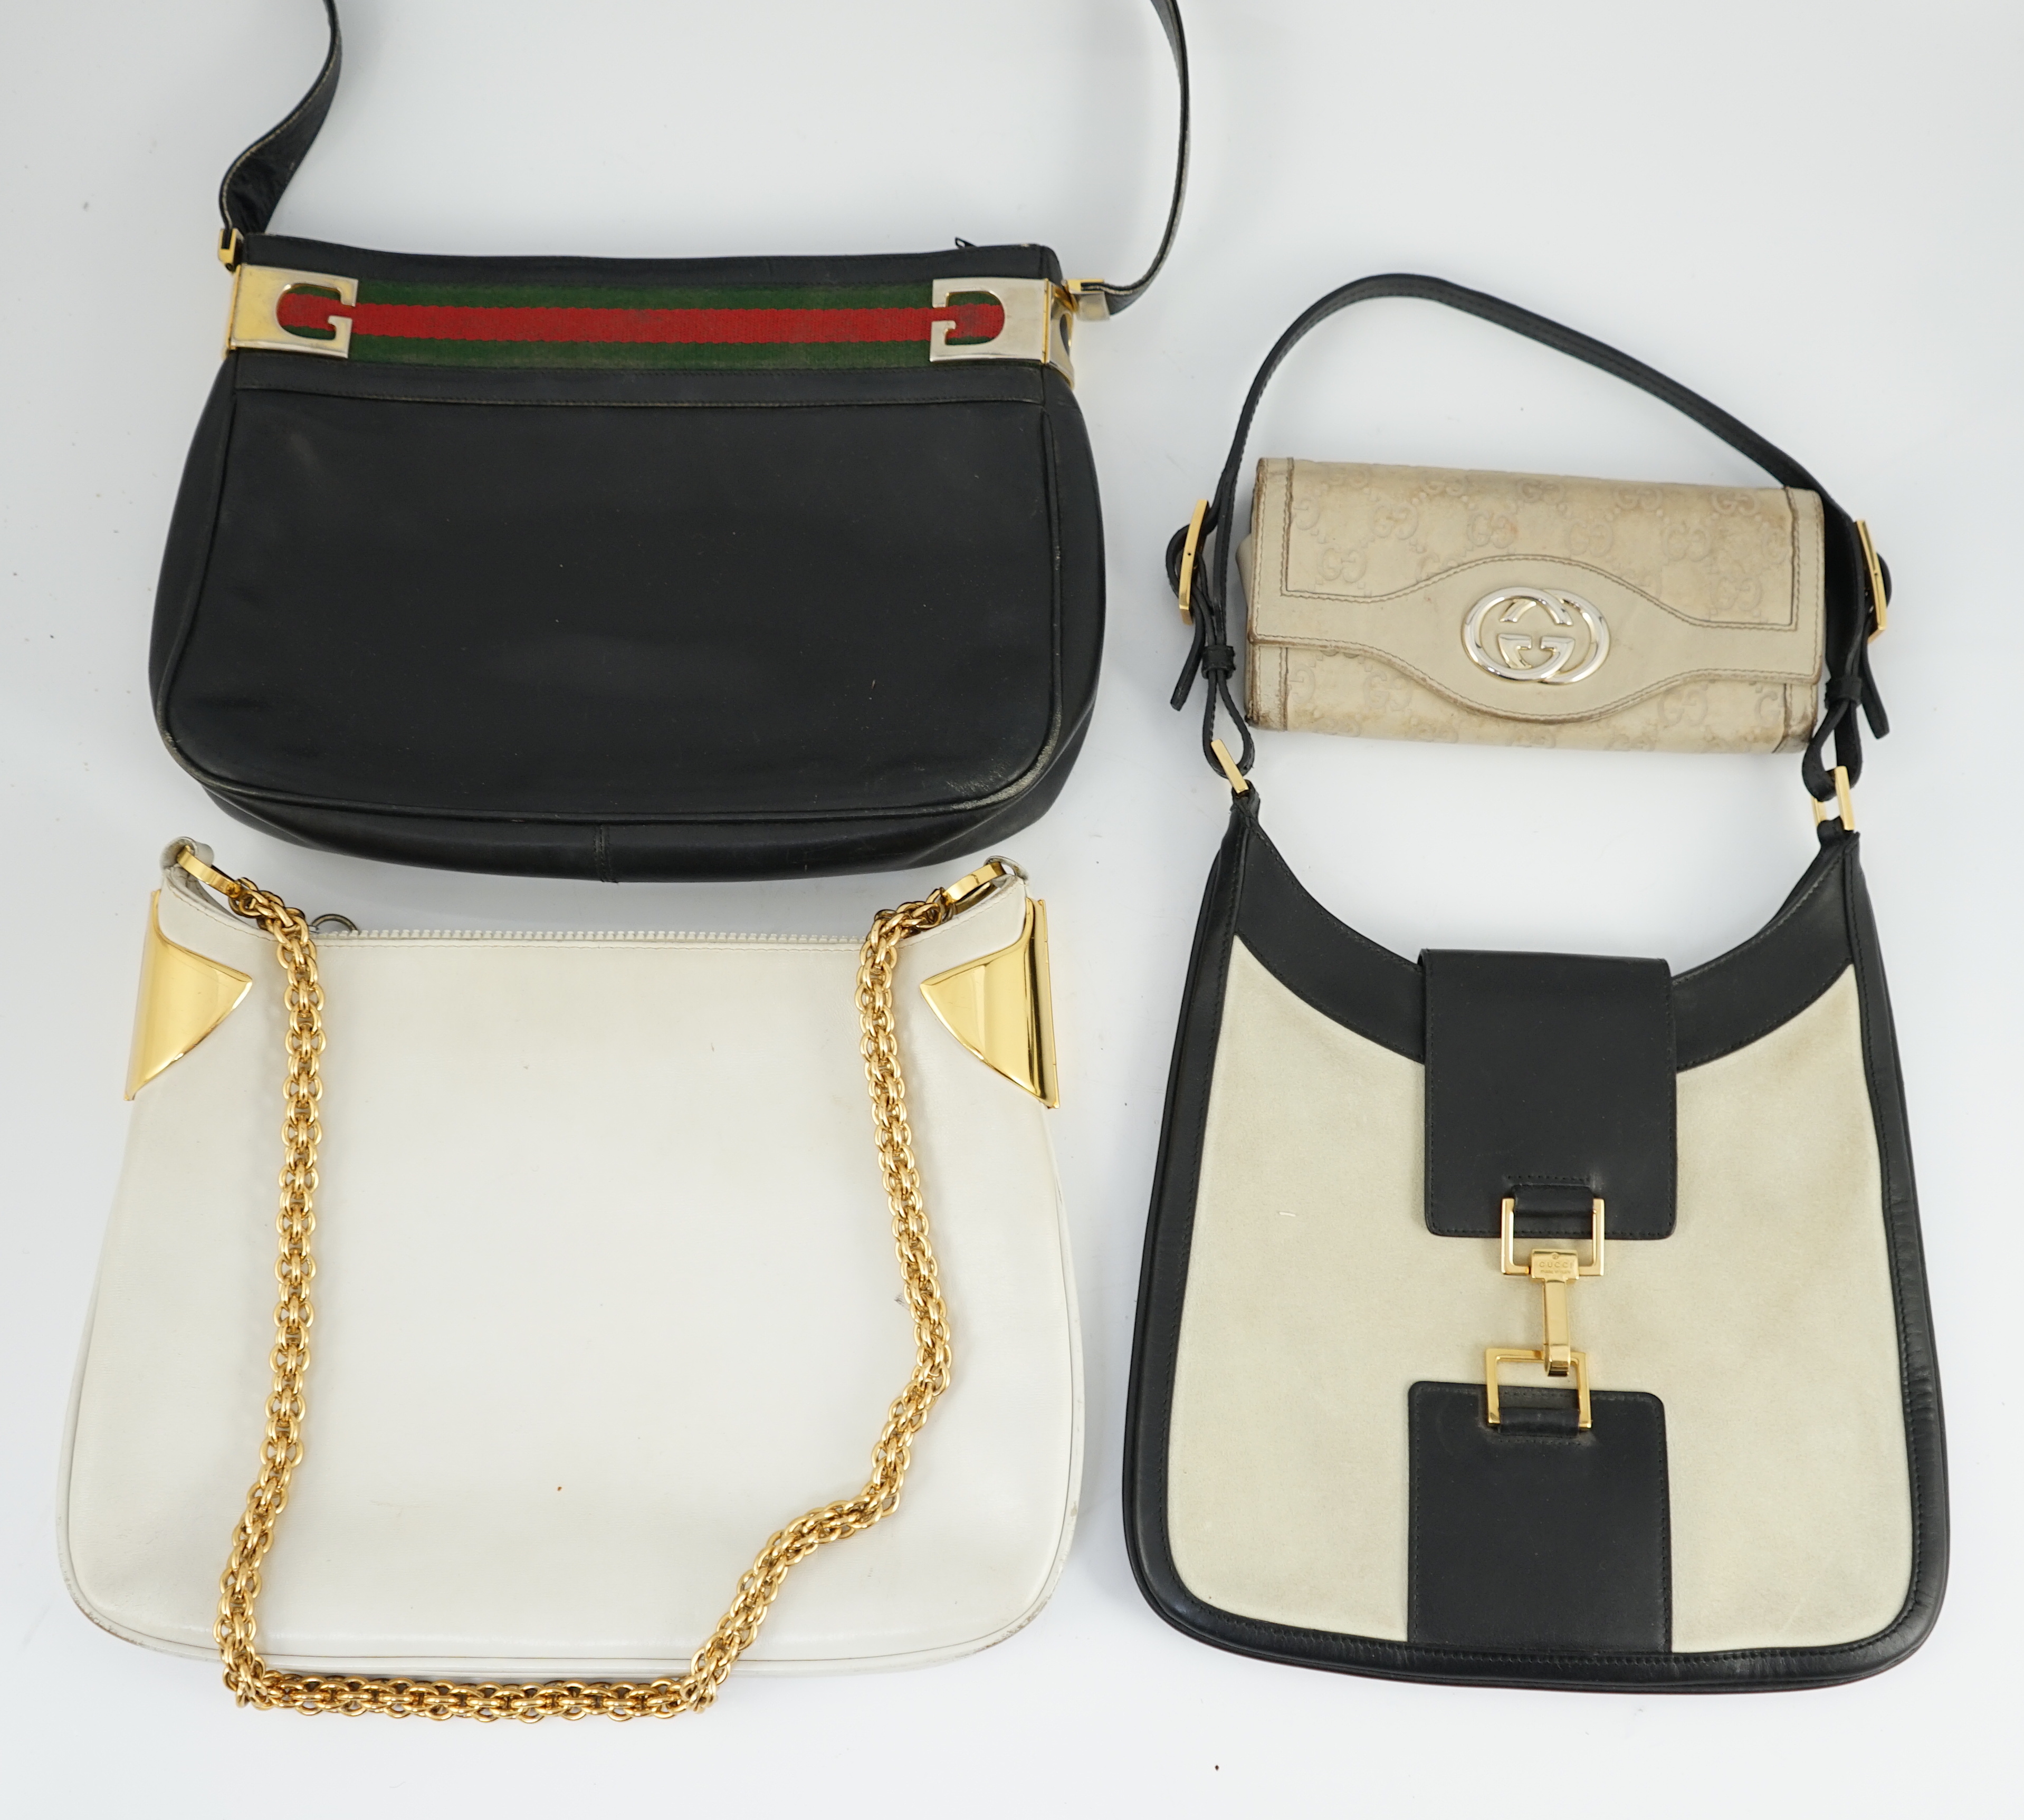 Three vintage Gucci hand bags and clutch wallet